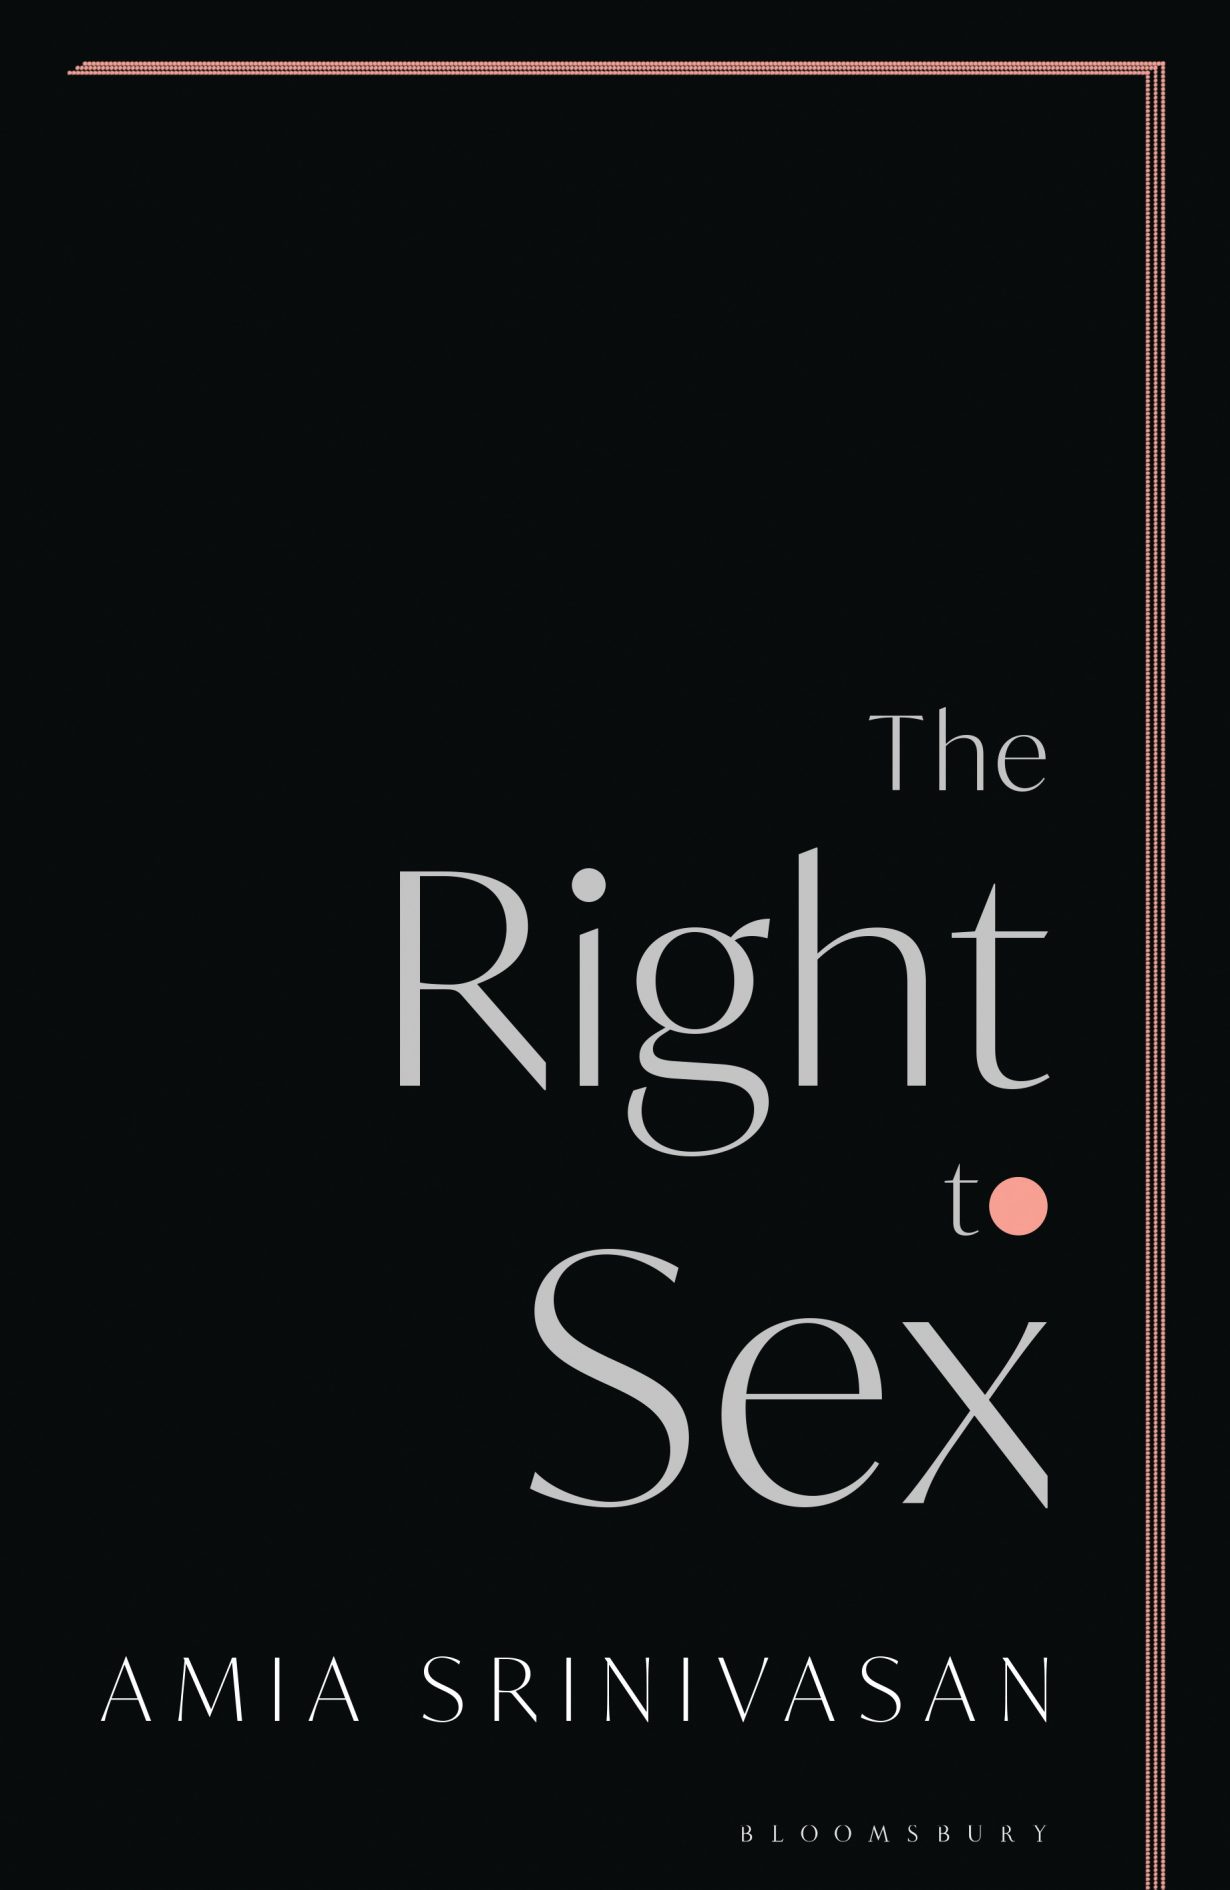 Why Would You Even Want to Have Sex? - ArtReview